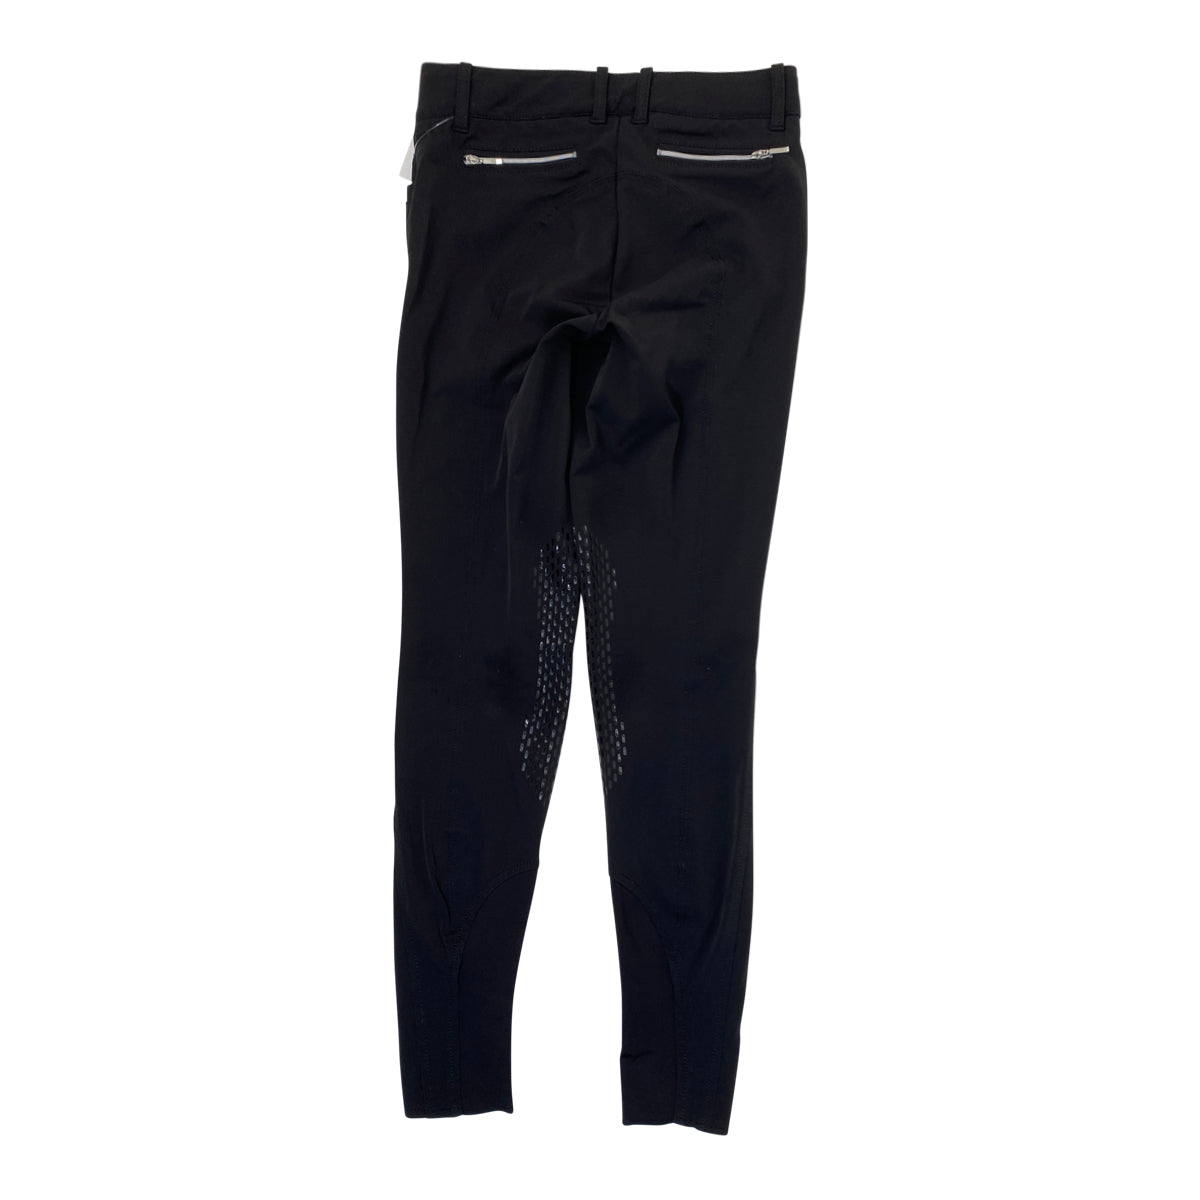 Equiline 'Ash' Breeches in Black